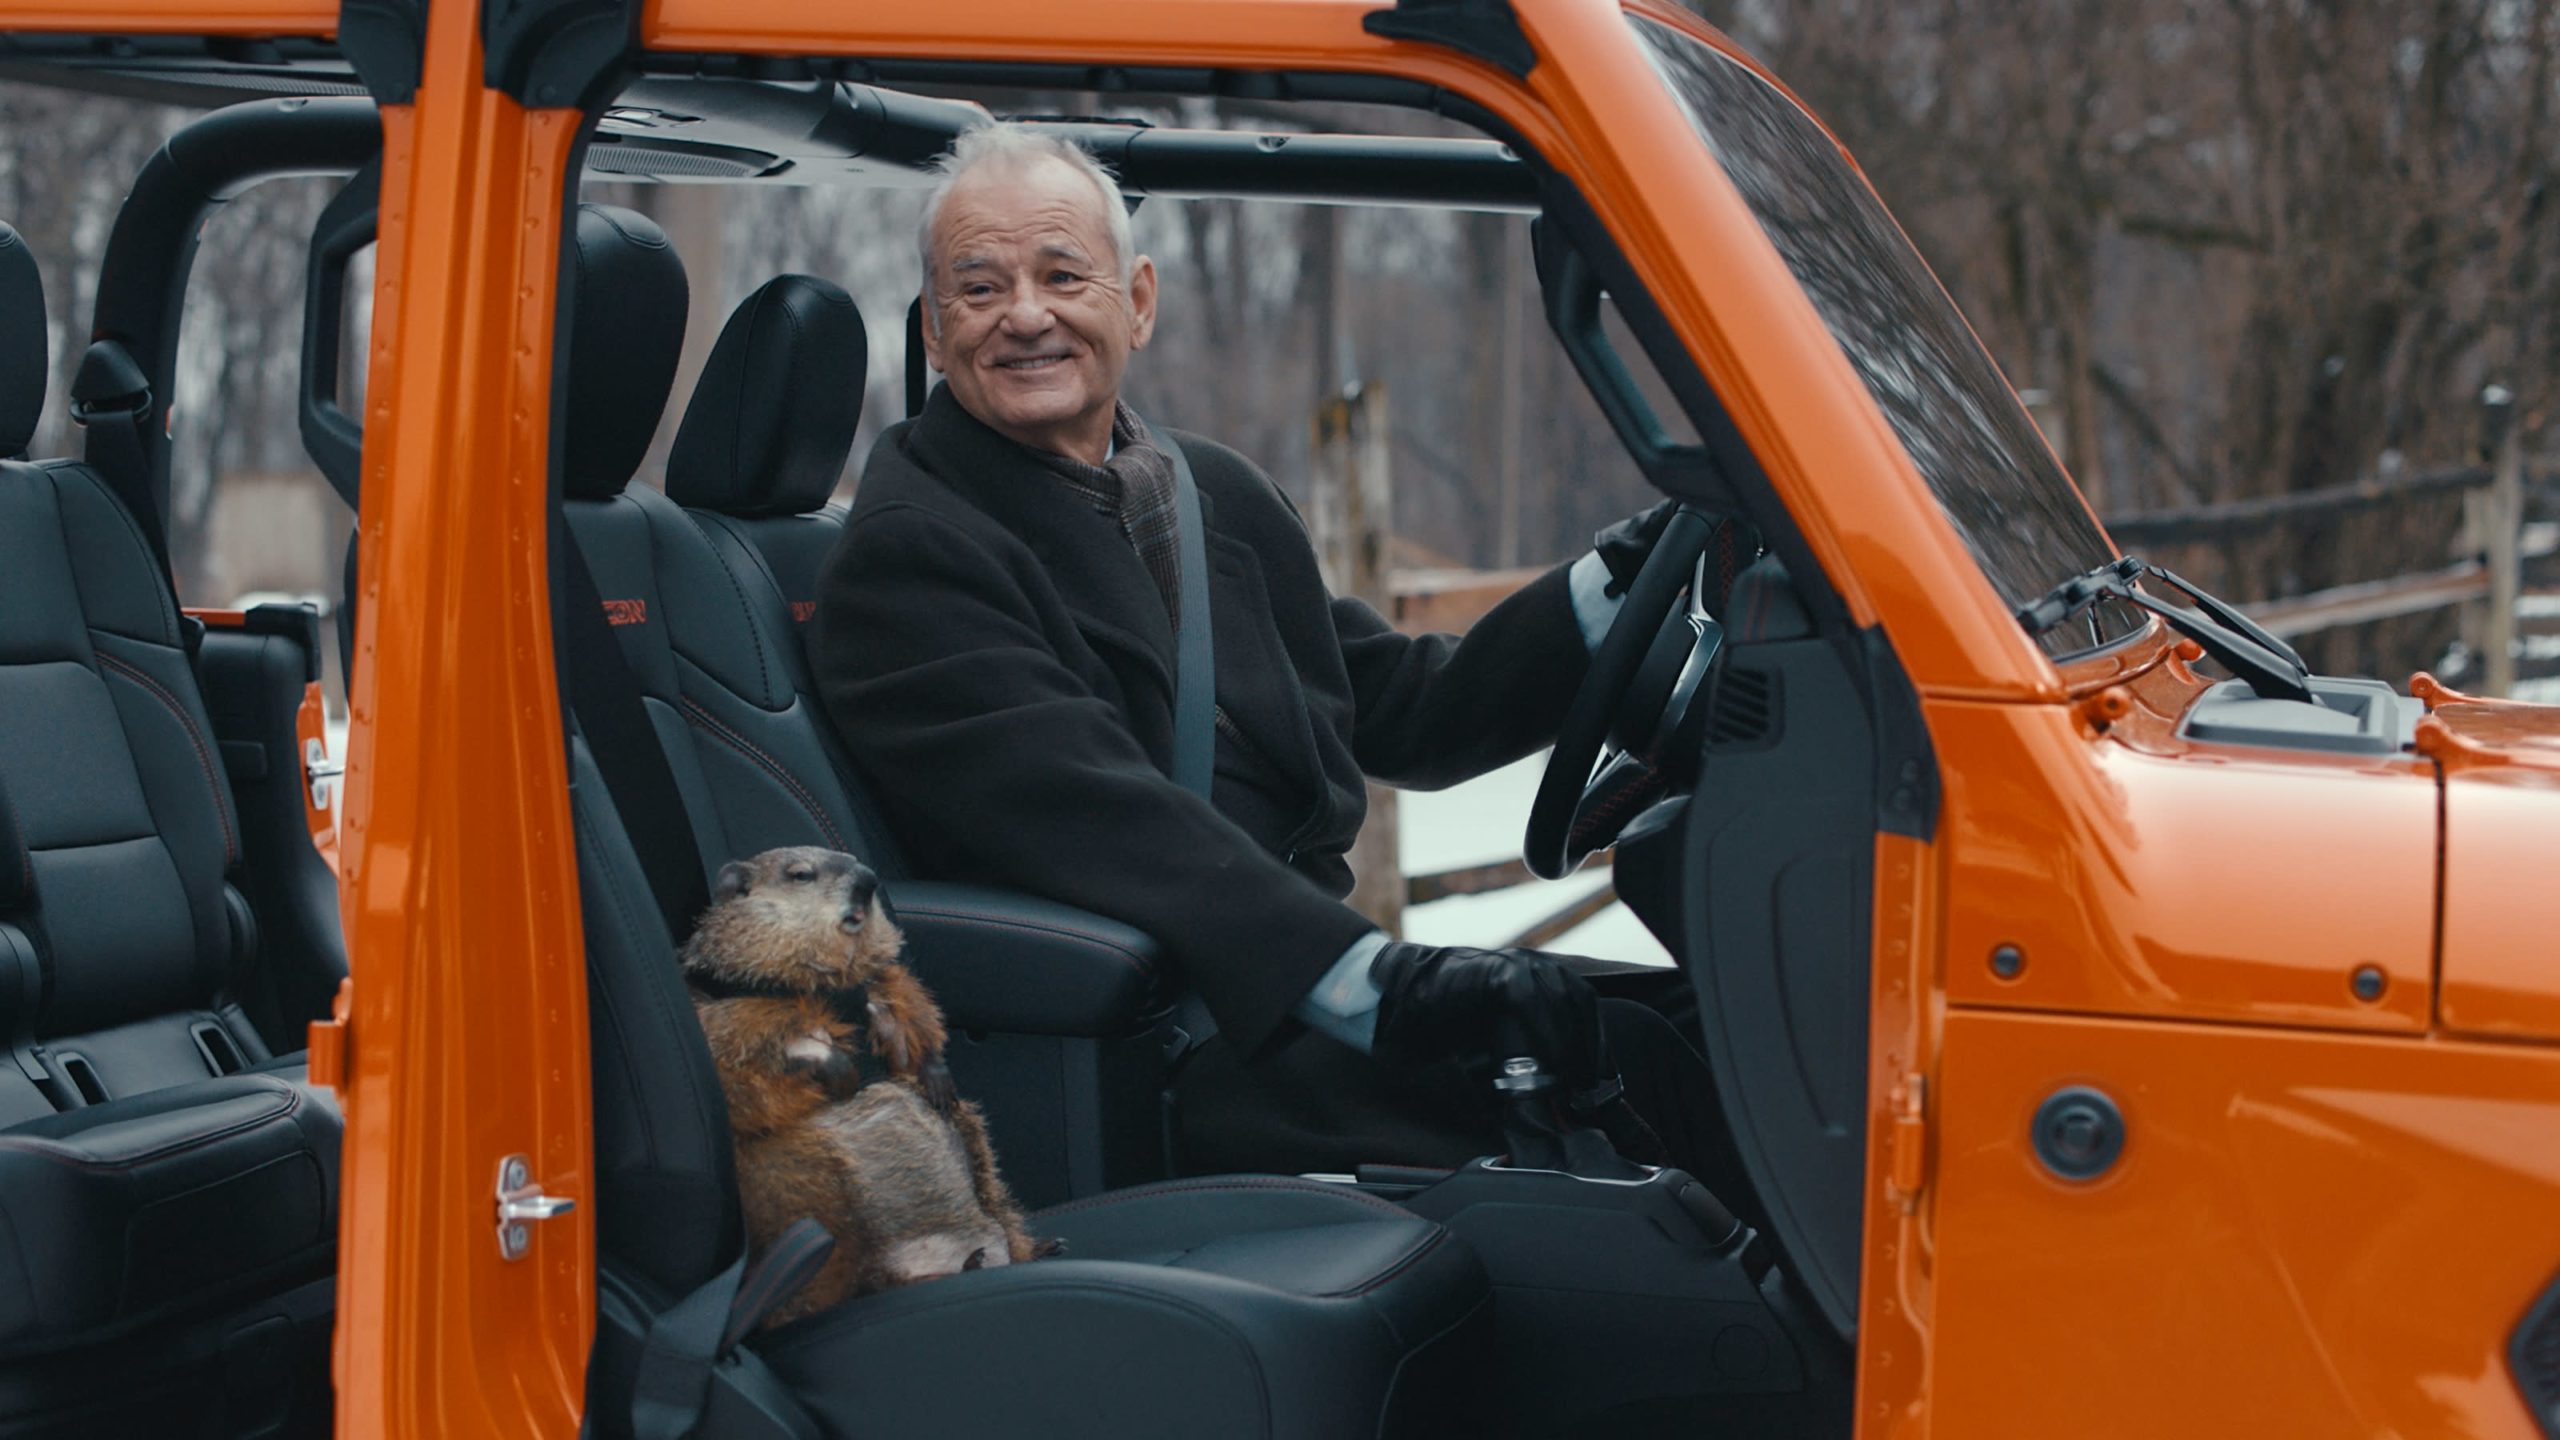 Jeep recreates ‘Groundhog Day’ with Invoice Murray for Tremendous Bowl 2020 advert